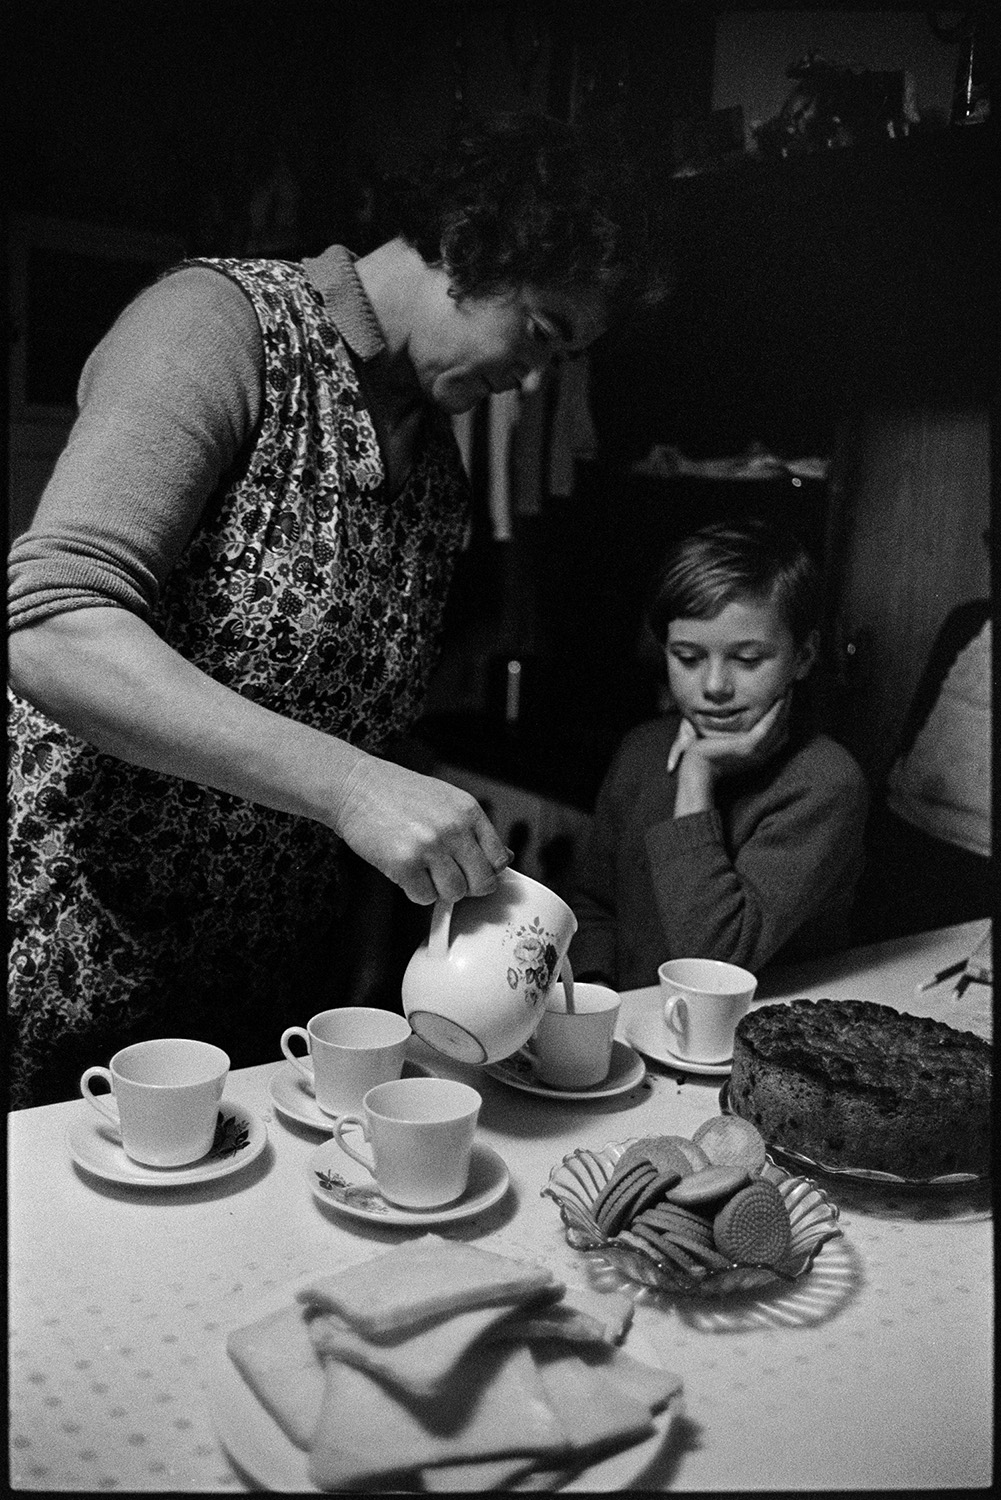 Woman making tea. Husband and children eating it. 
[Mrs Oke pouring tea for her son at Deckport, Hatherleigh. The table is laid with bread, biscuits and cake.]